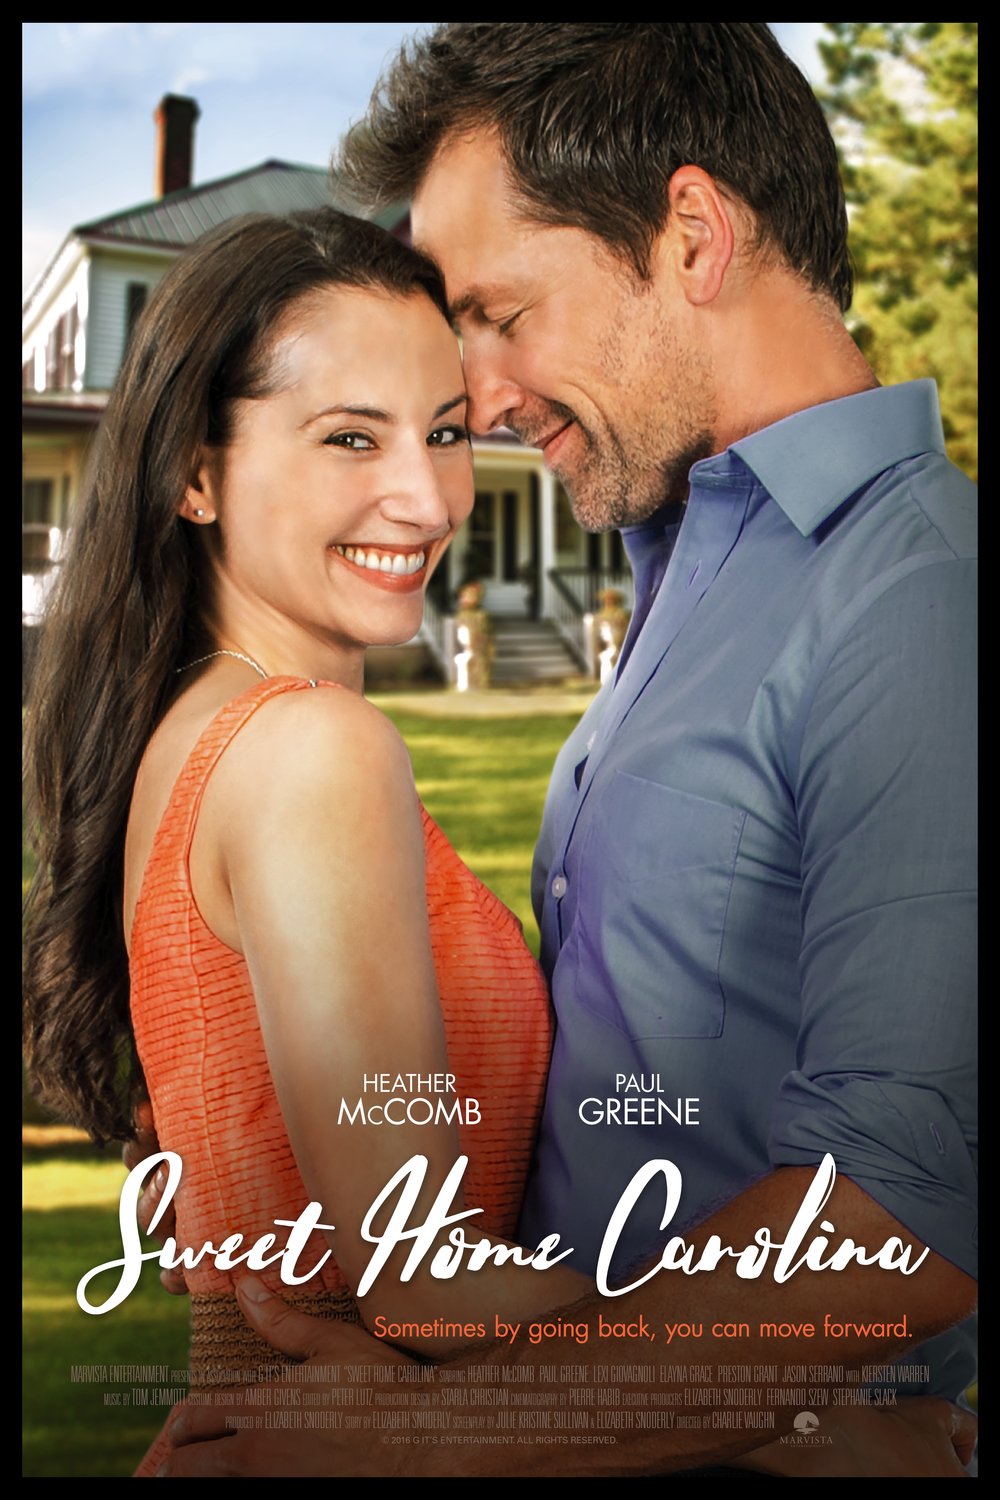 Poster of the movie Sweet Home Carolina